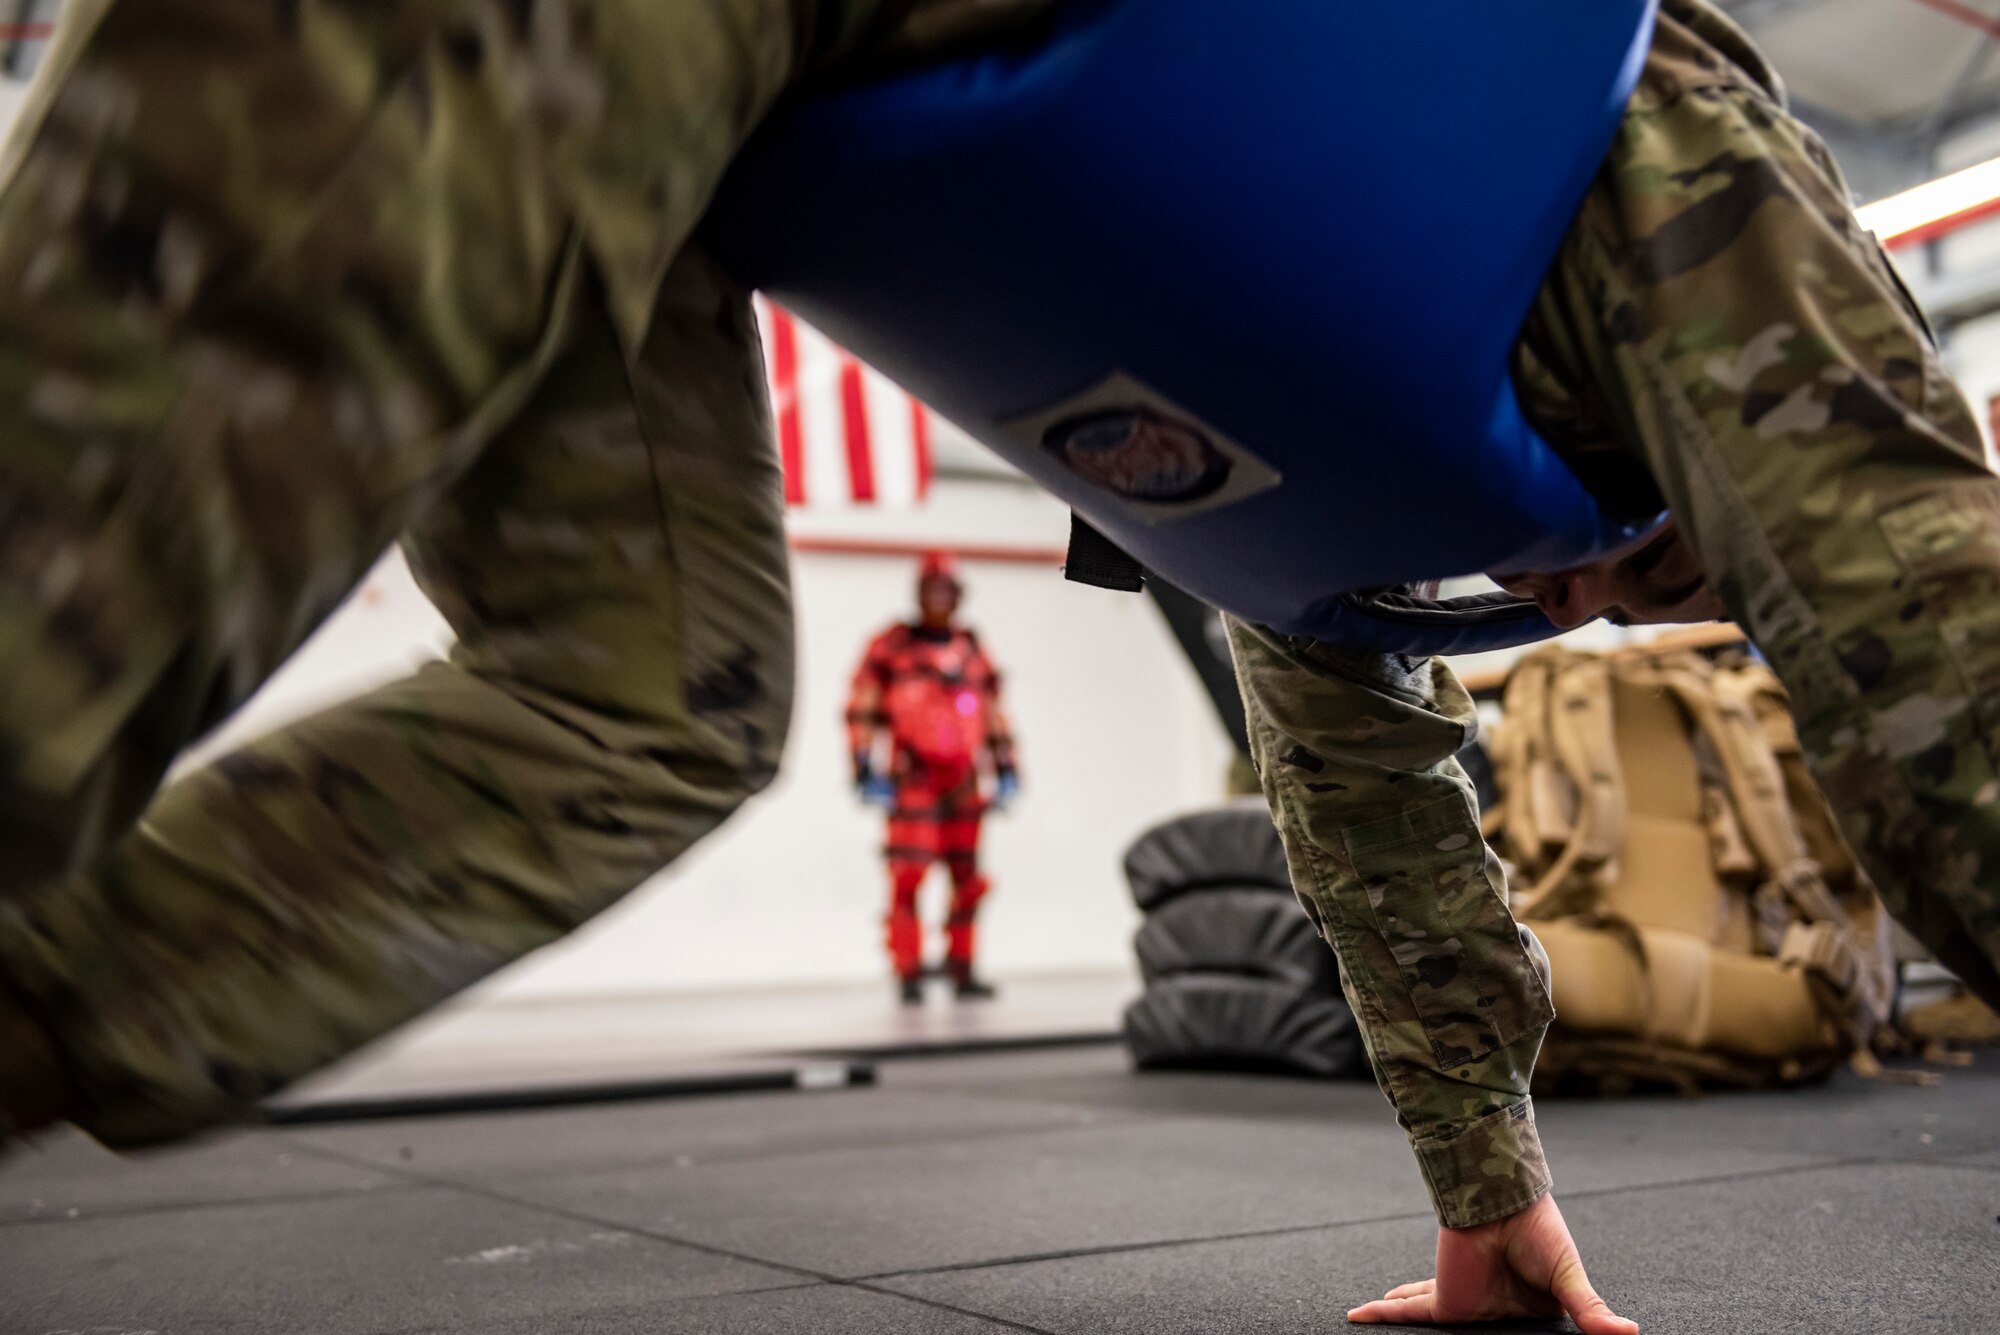 A U.S. Air Force Airmen does mountain climbers before sparring with another Airman during a Leader Led Training Course at Ramstein Air Base, Germany, Dec. 7, 2019. The Airman did mountain climbers to simulate a real-world altercation where she may not be at full strength during a situation. (U.S. Air Force photo by Staff Sgt. Devin Nothstine)